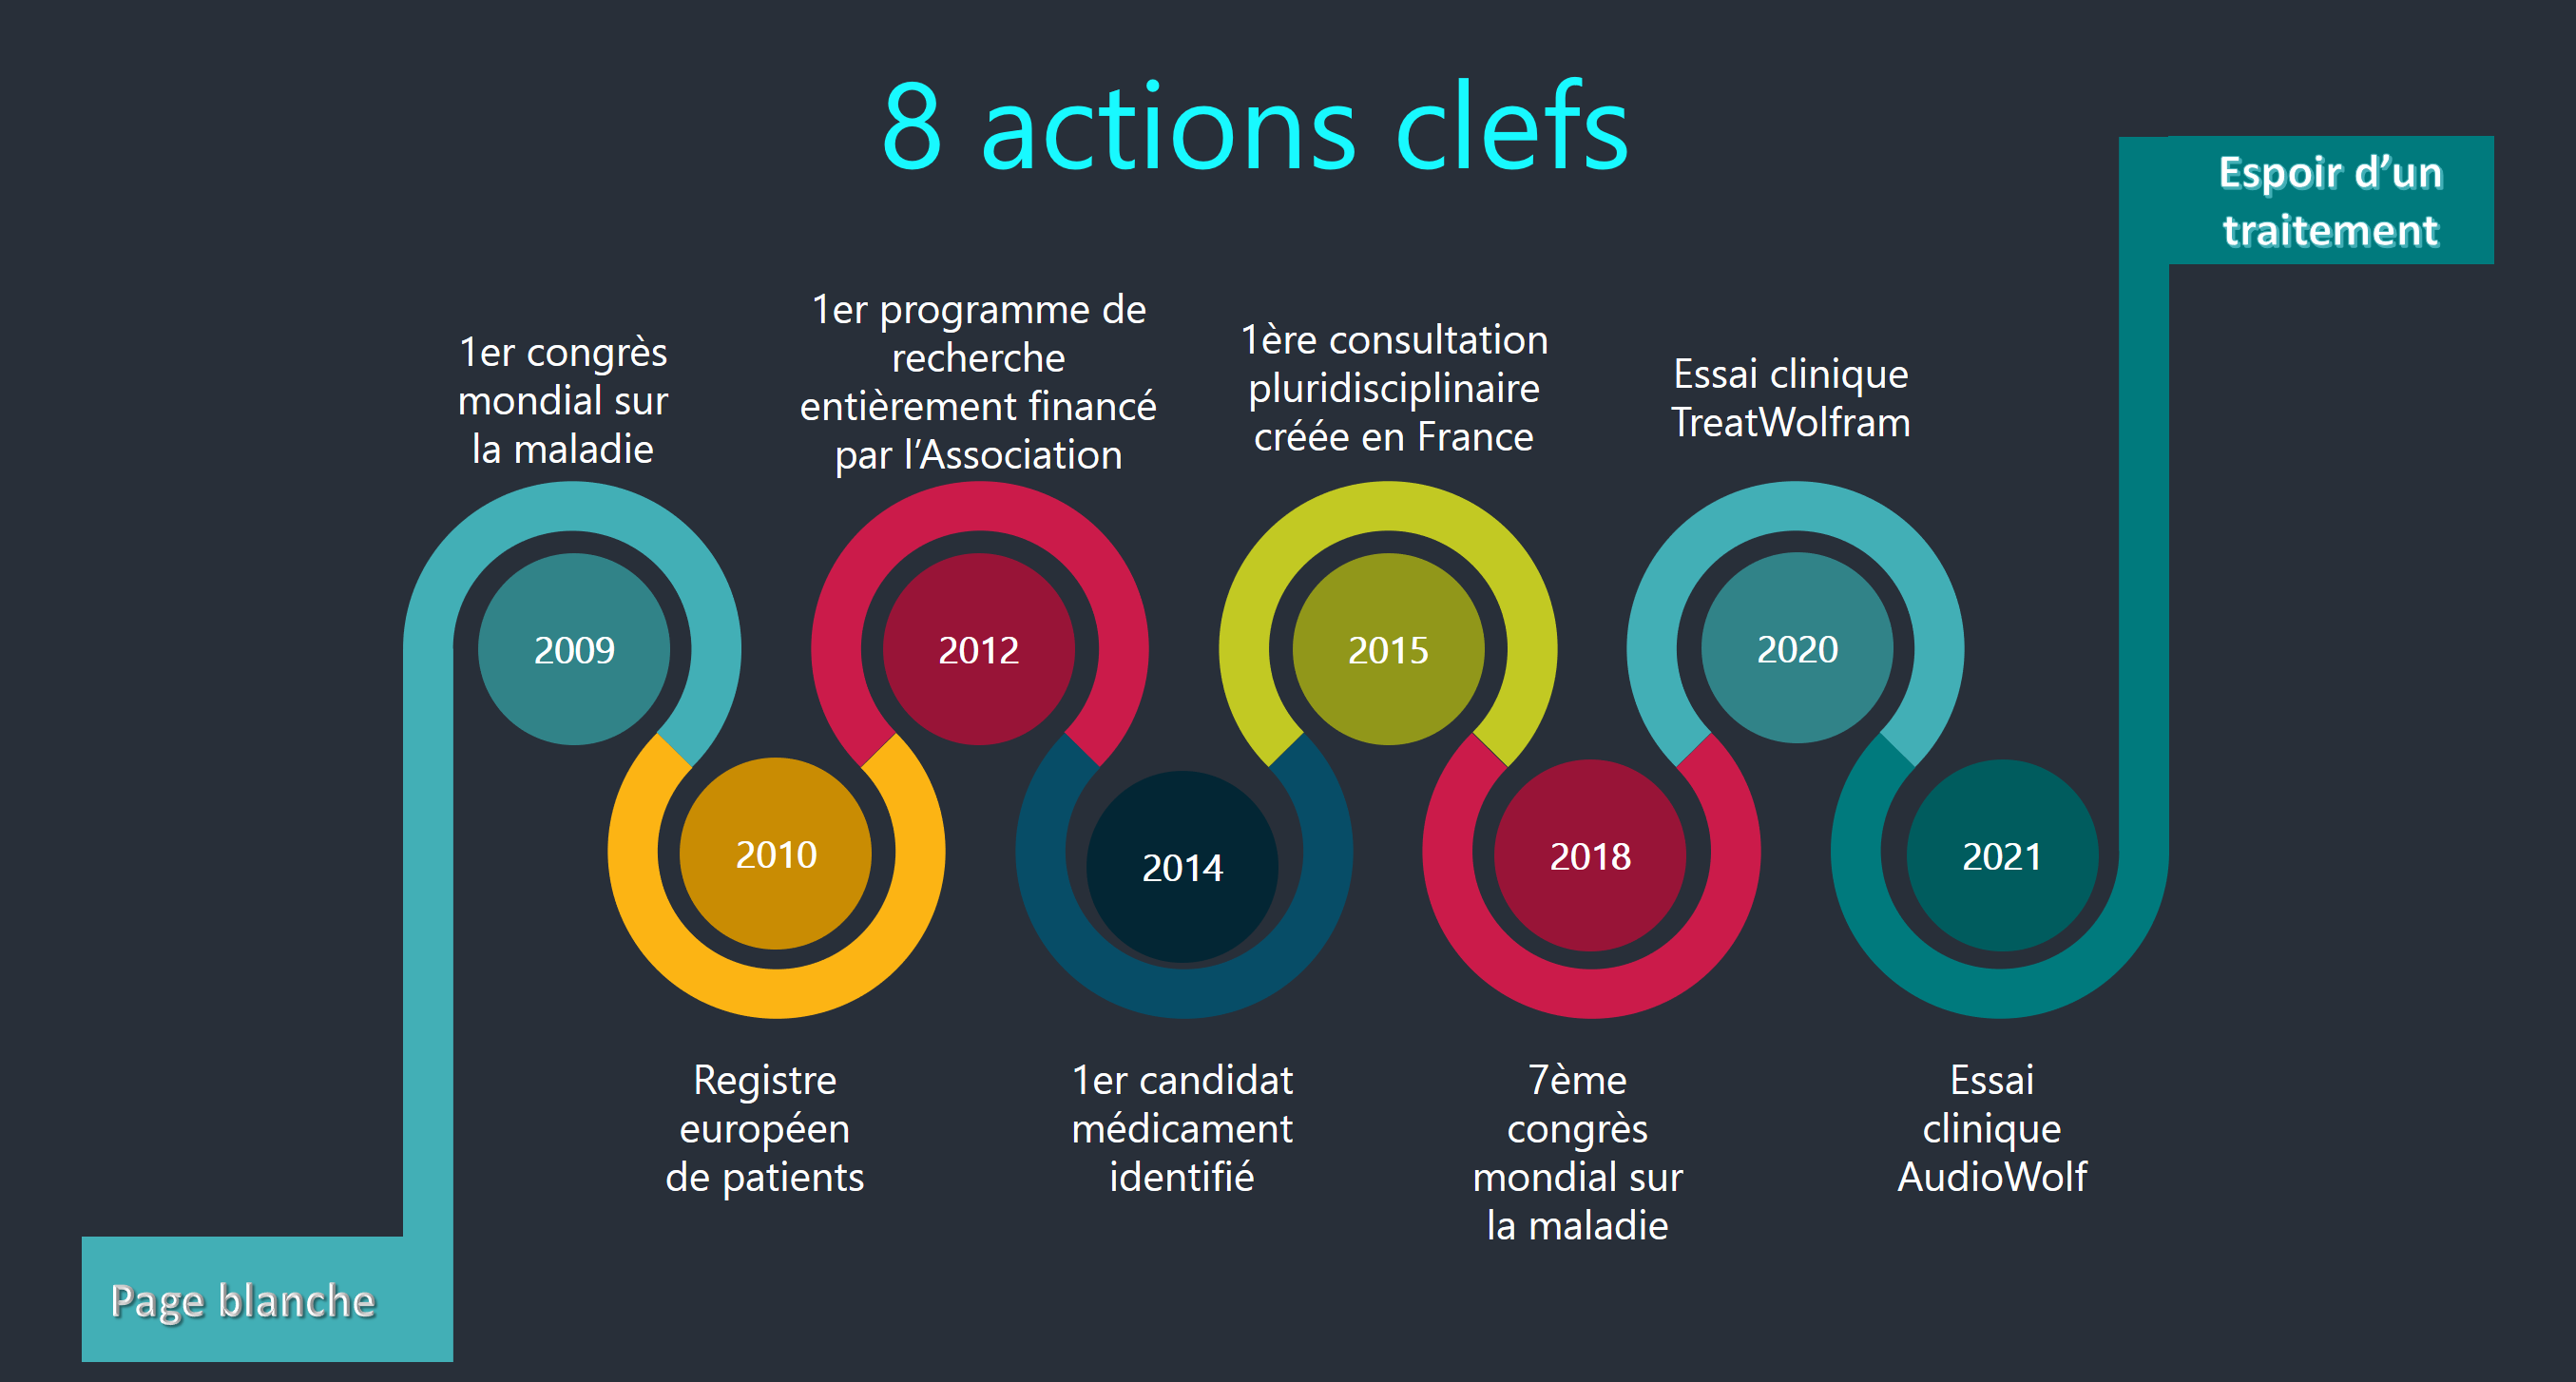 8 actions clefs